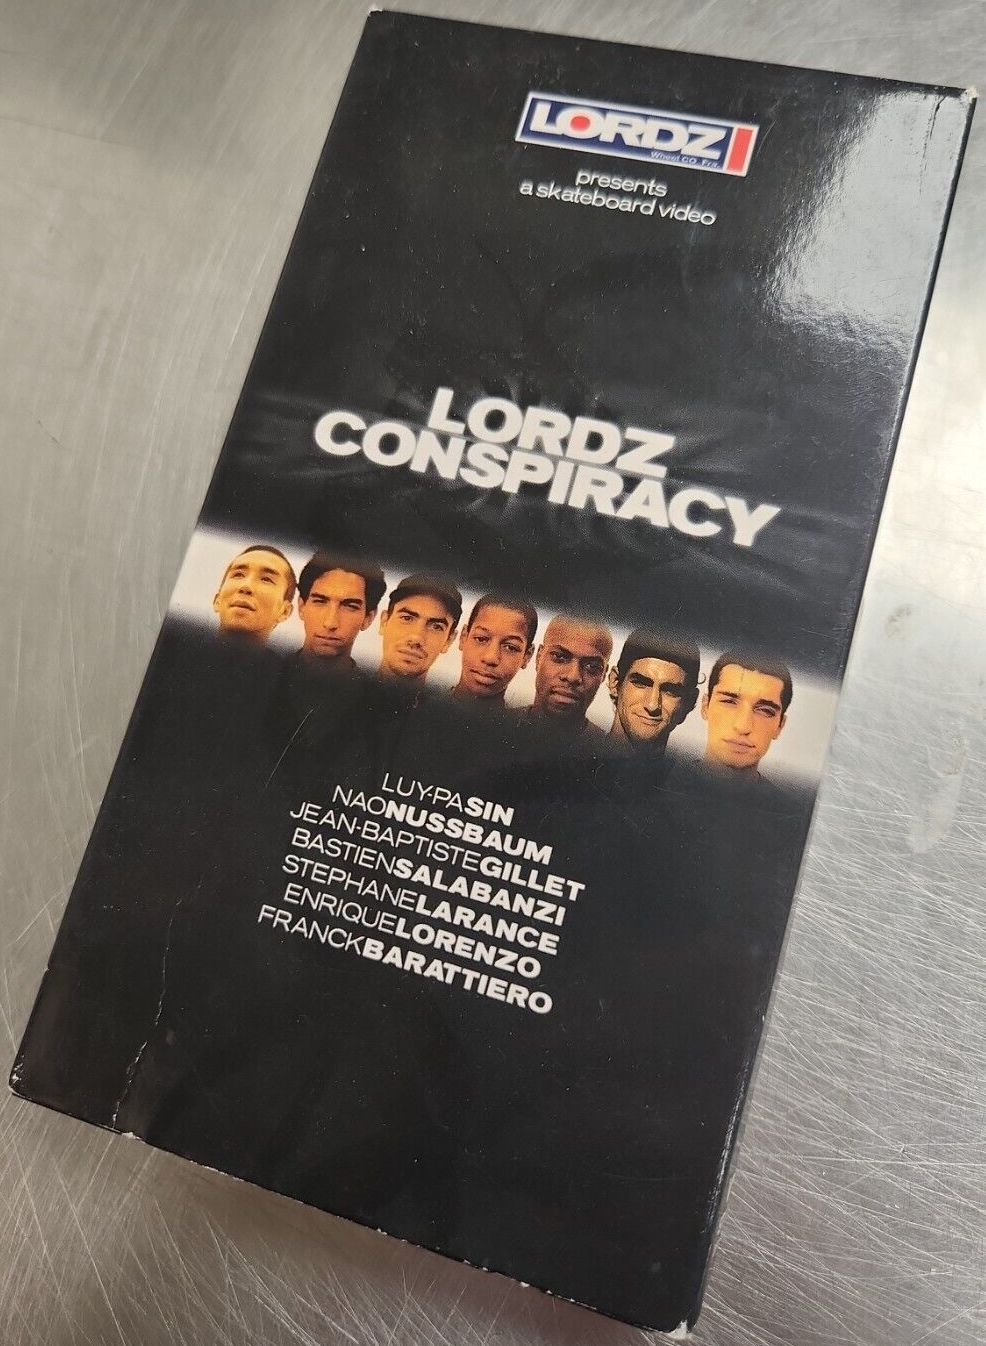 Lordz - Conspiracy cover